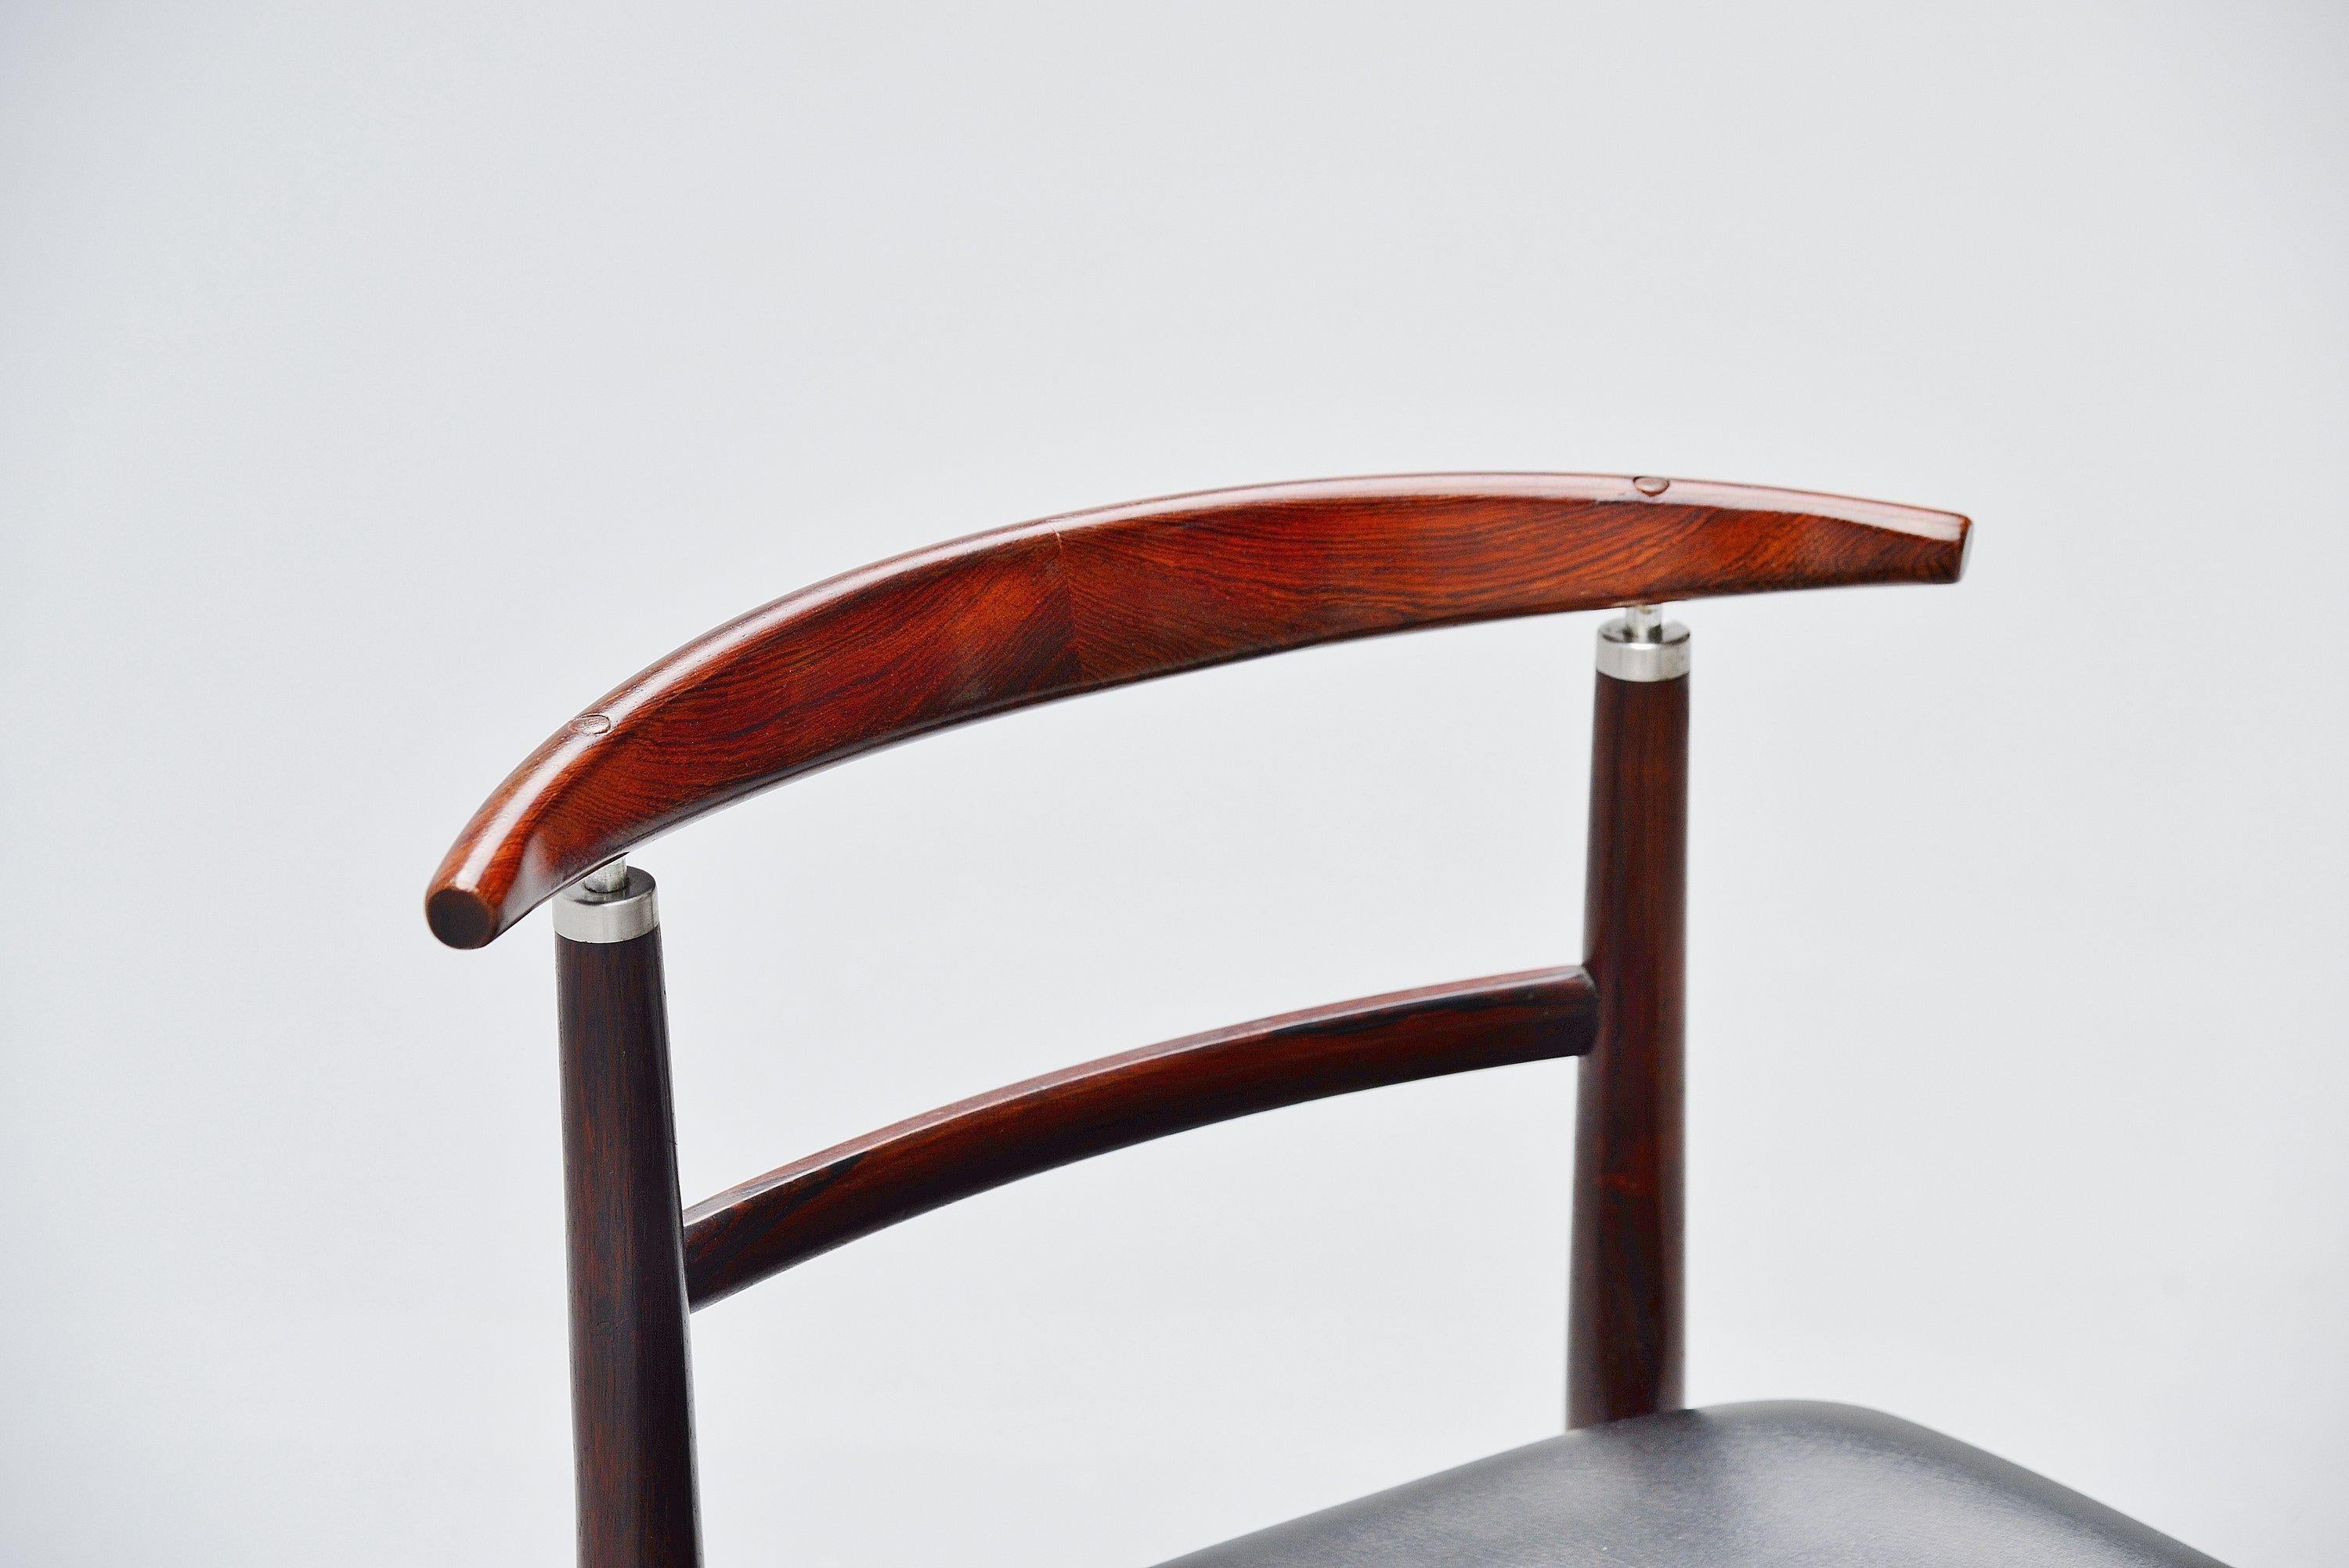 Nice sculptural chair model 465 designed by designer duo Helge Sibast and Borge Rammeskov and manufactured by Sibast Mobler, Denmark, 1962. This chair has a solid rosewood frame and black leatherette upholstery. The chair is great to use as a desk